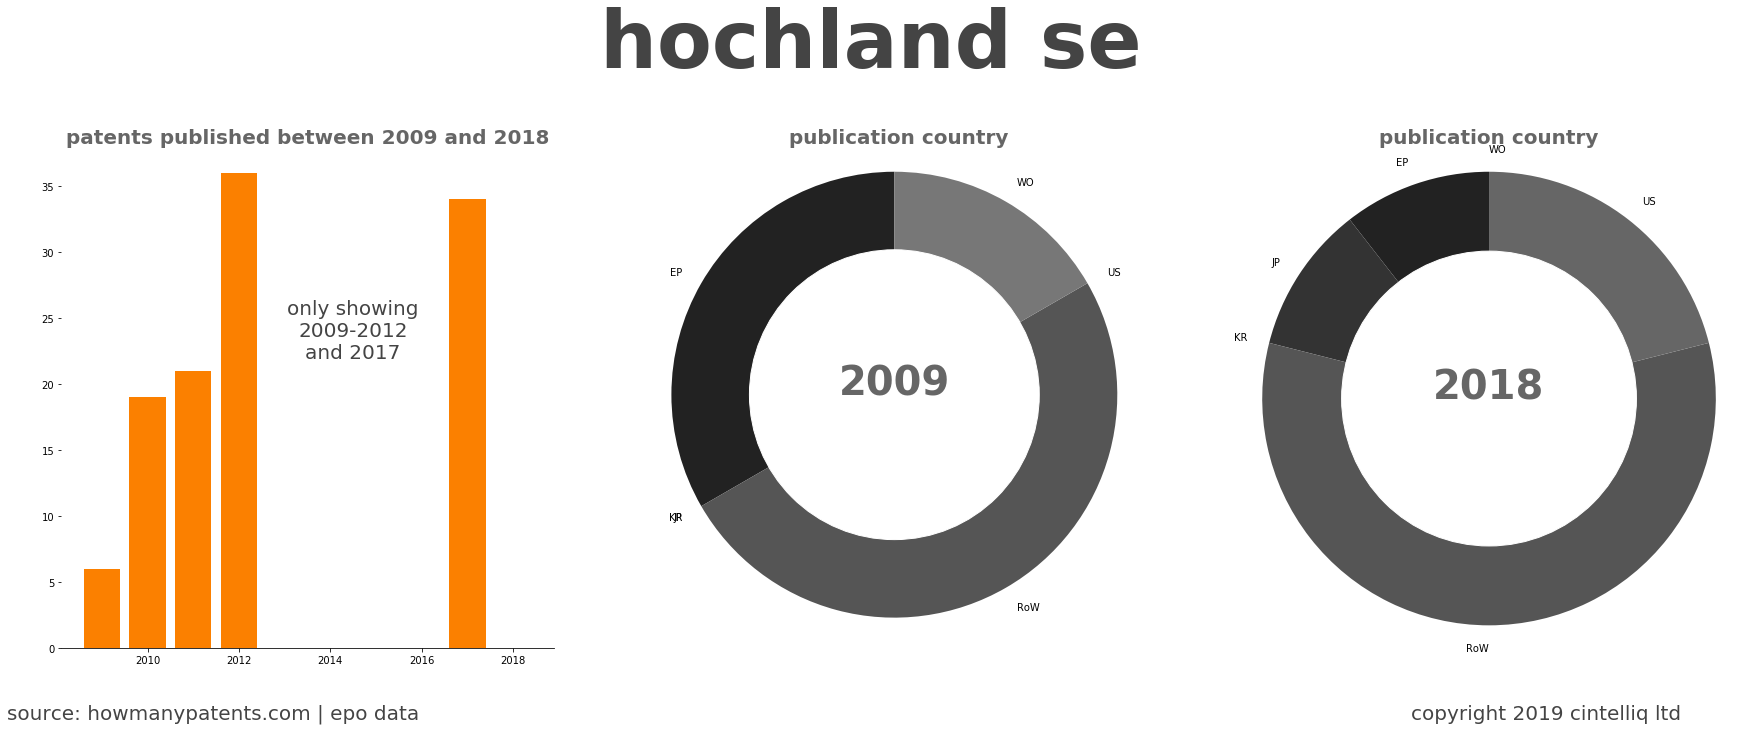 summary of patents for Hochland Se